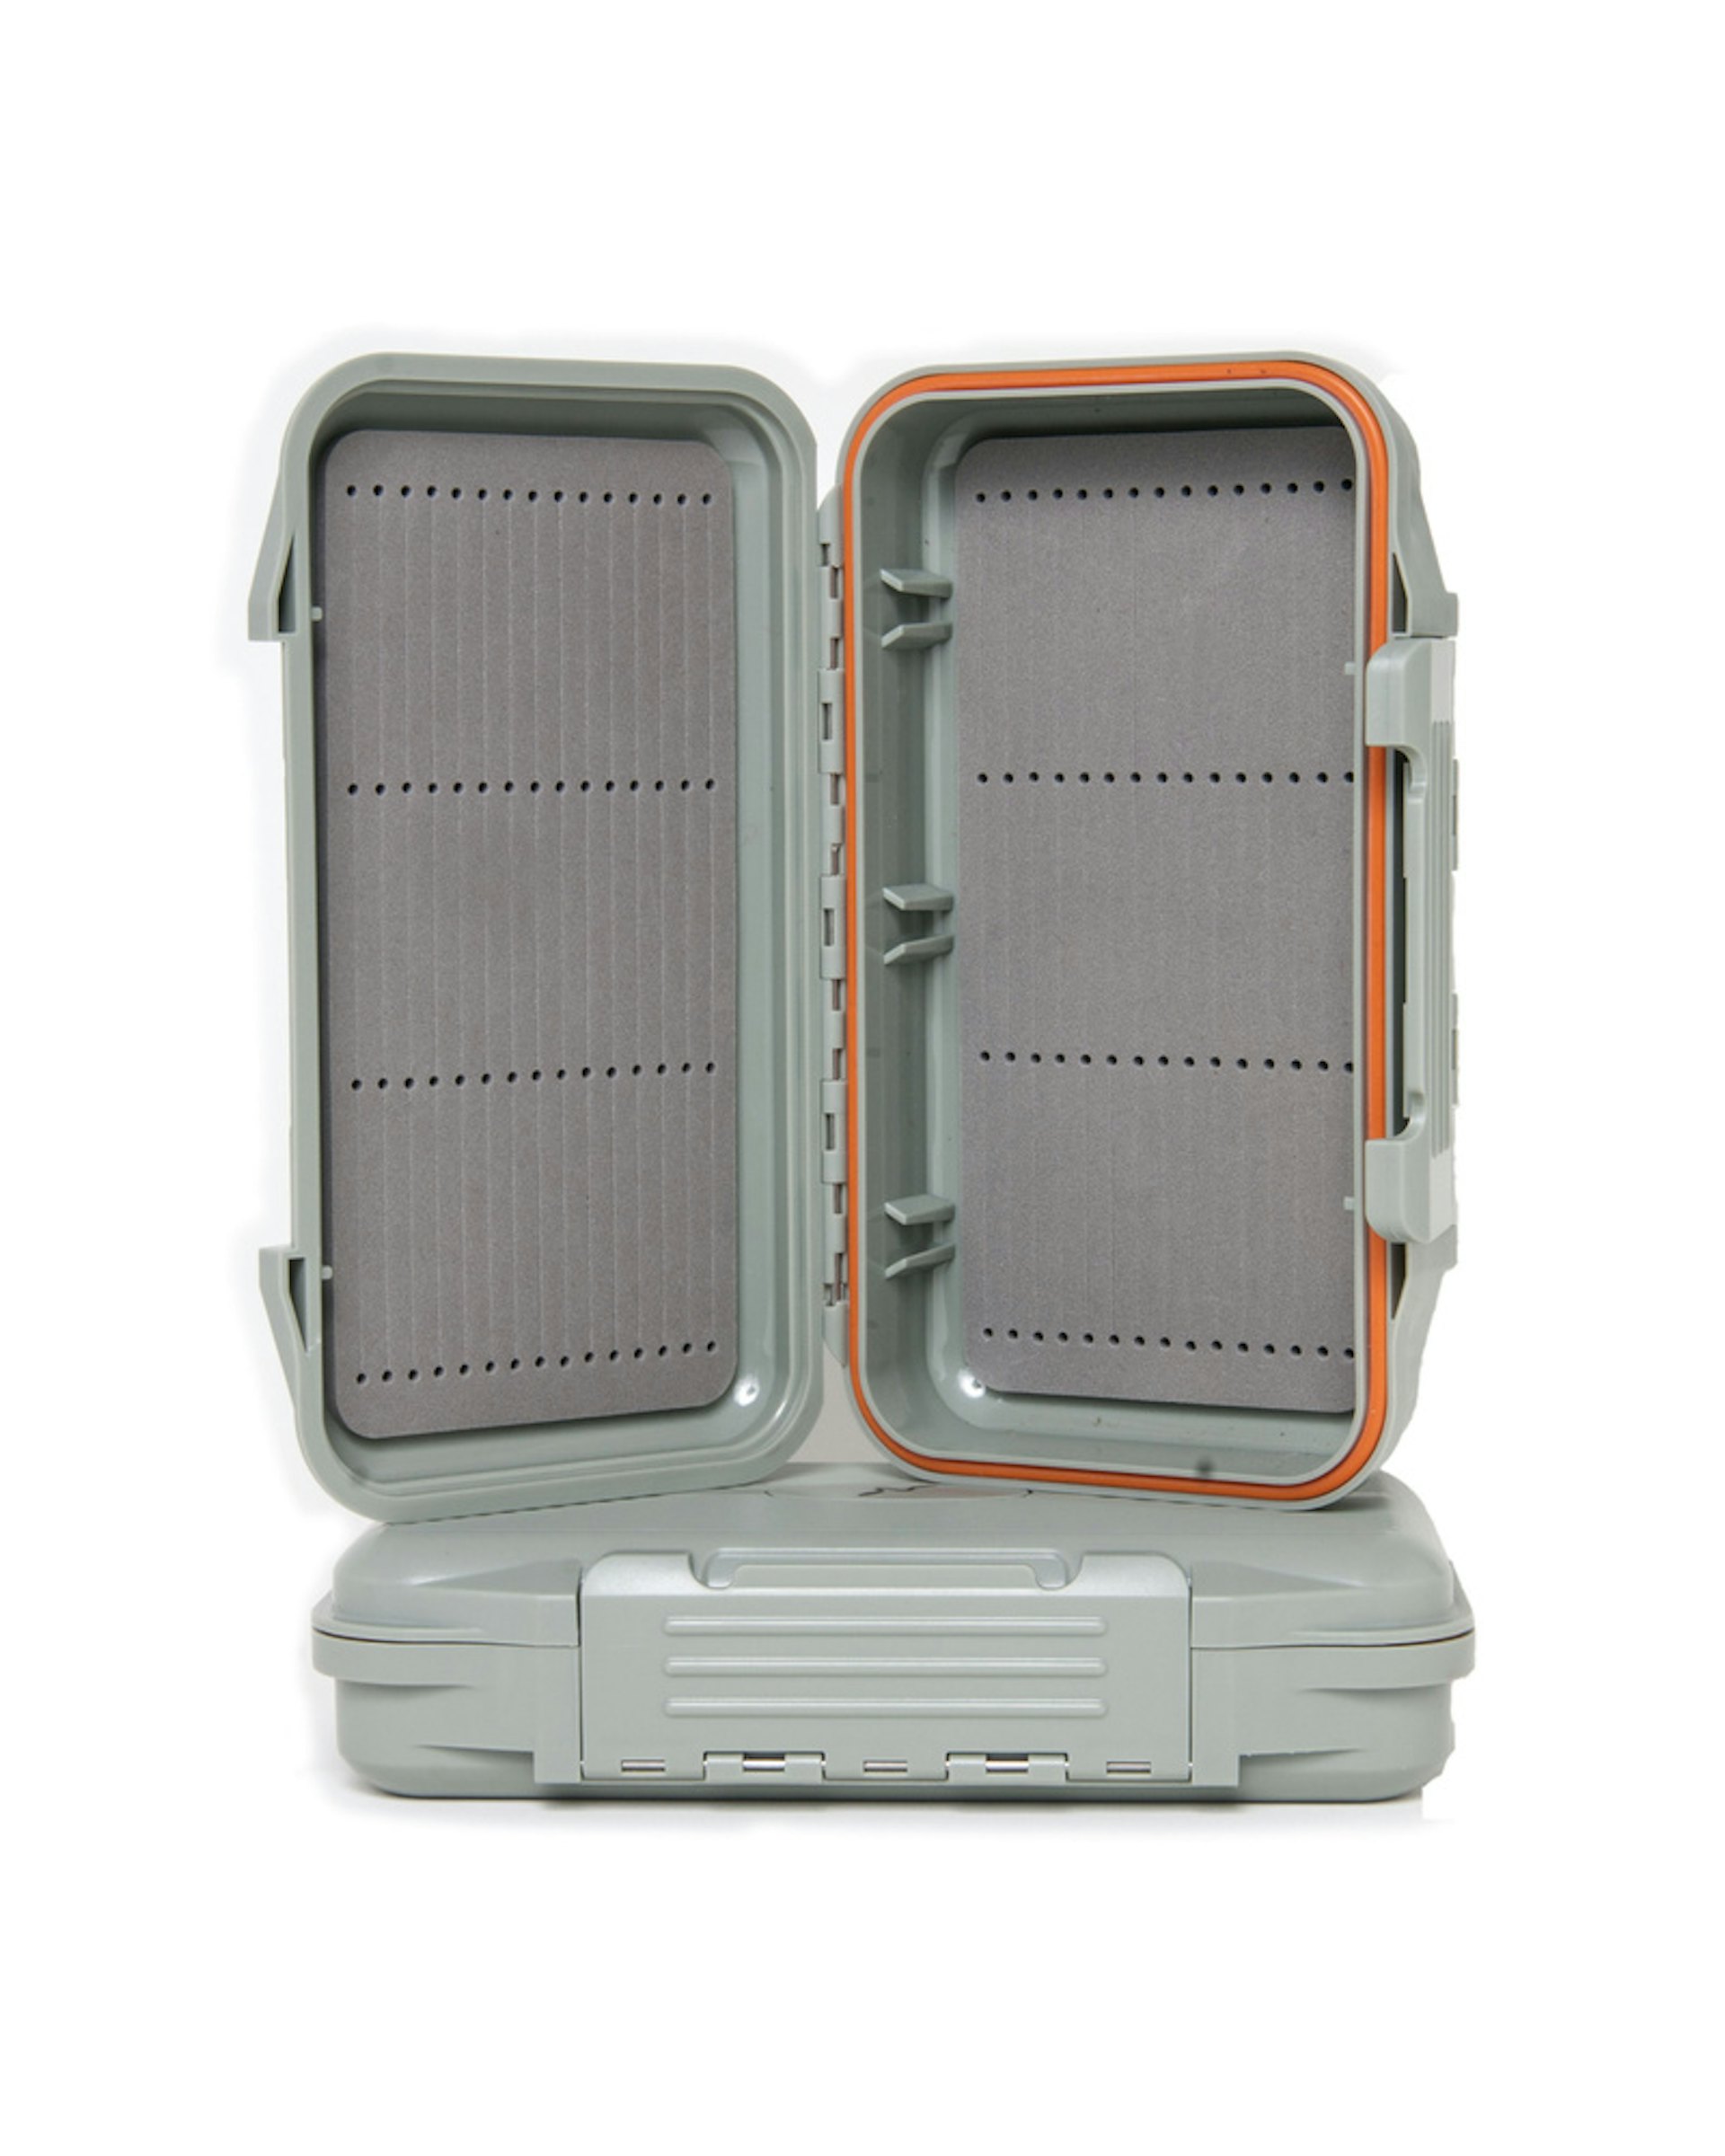 Fly Fishing Boxes Slit Grip Foam Inserts Compnts Fly Box Case F